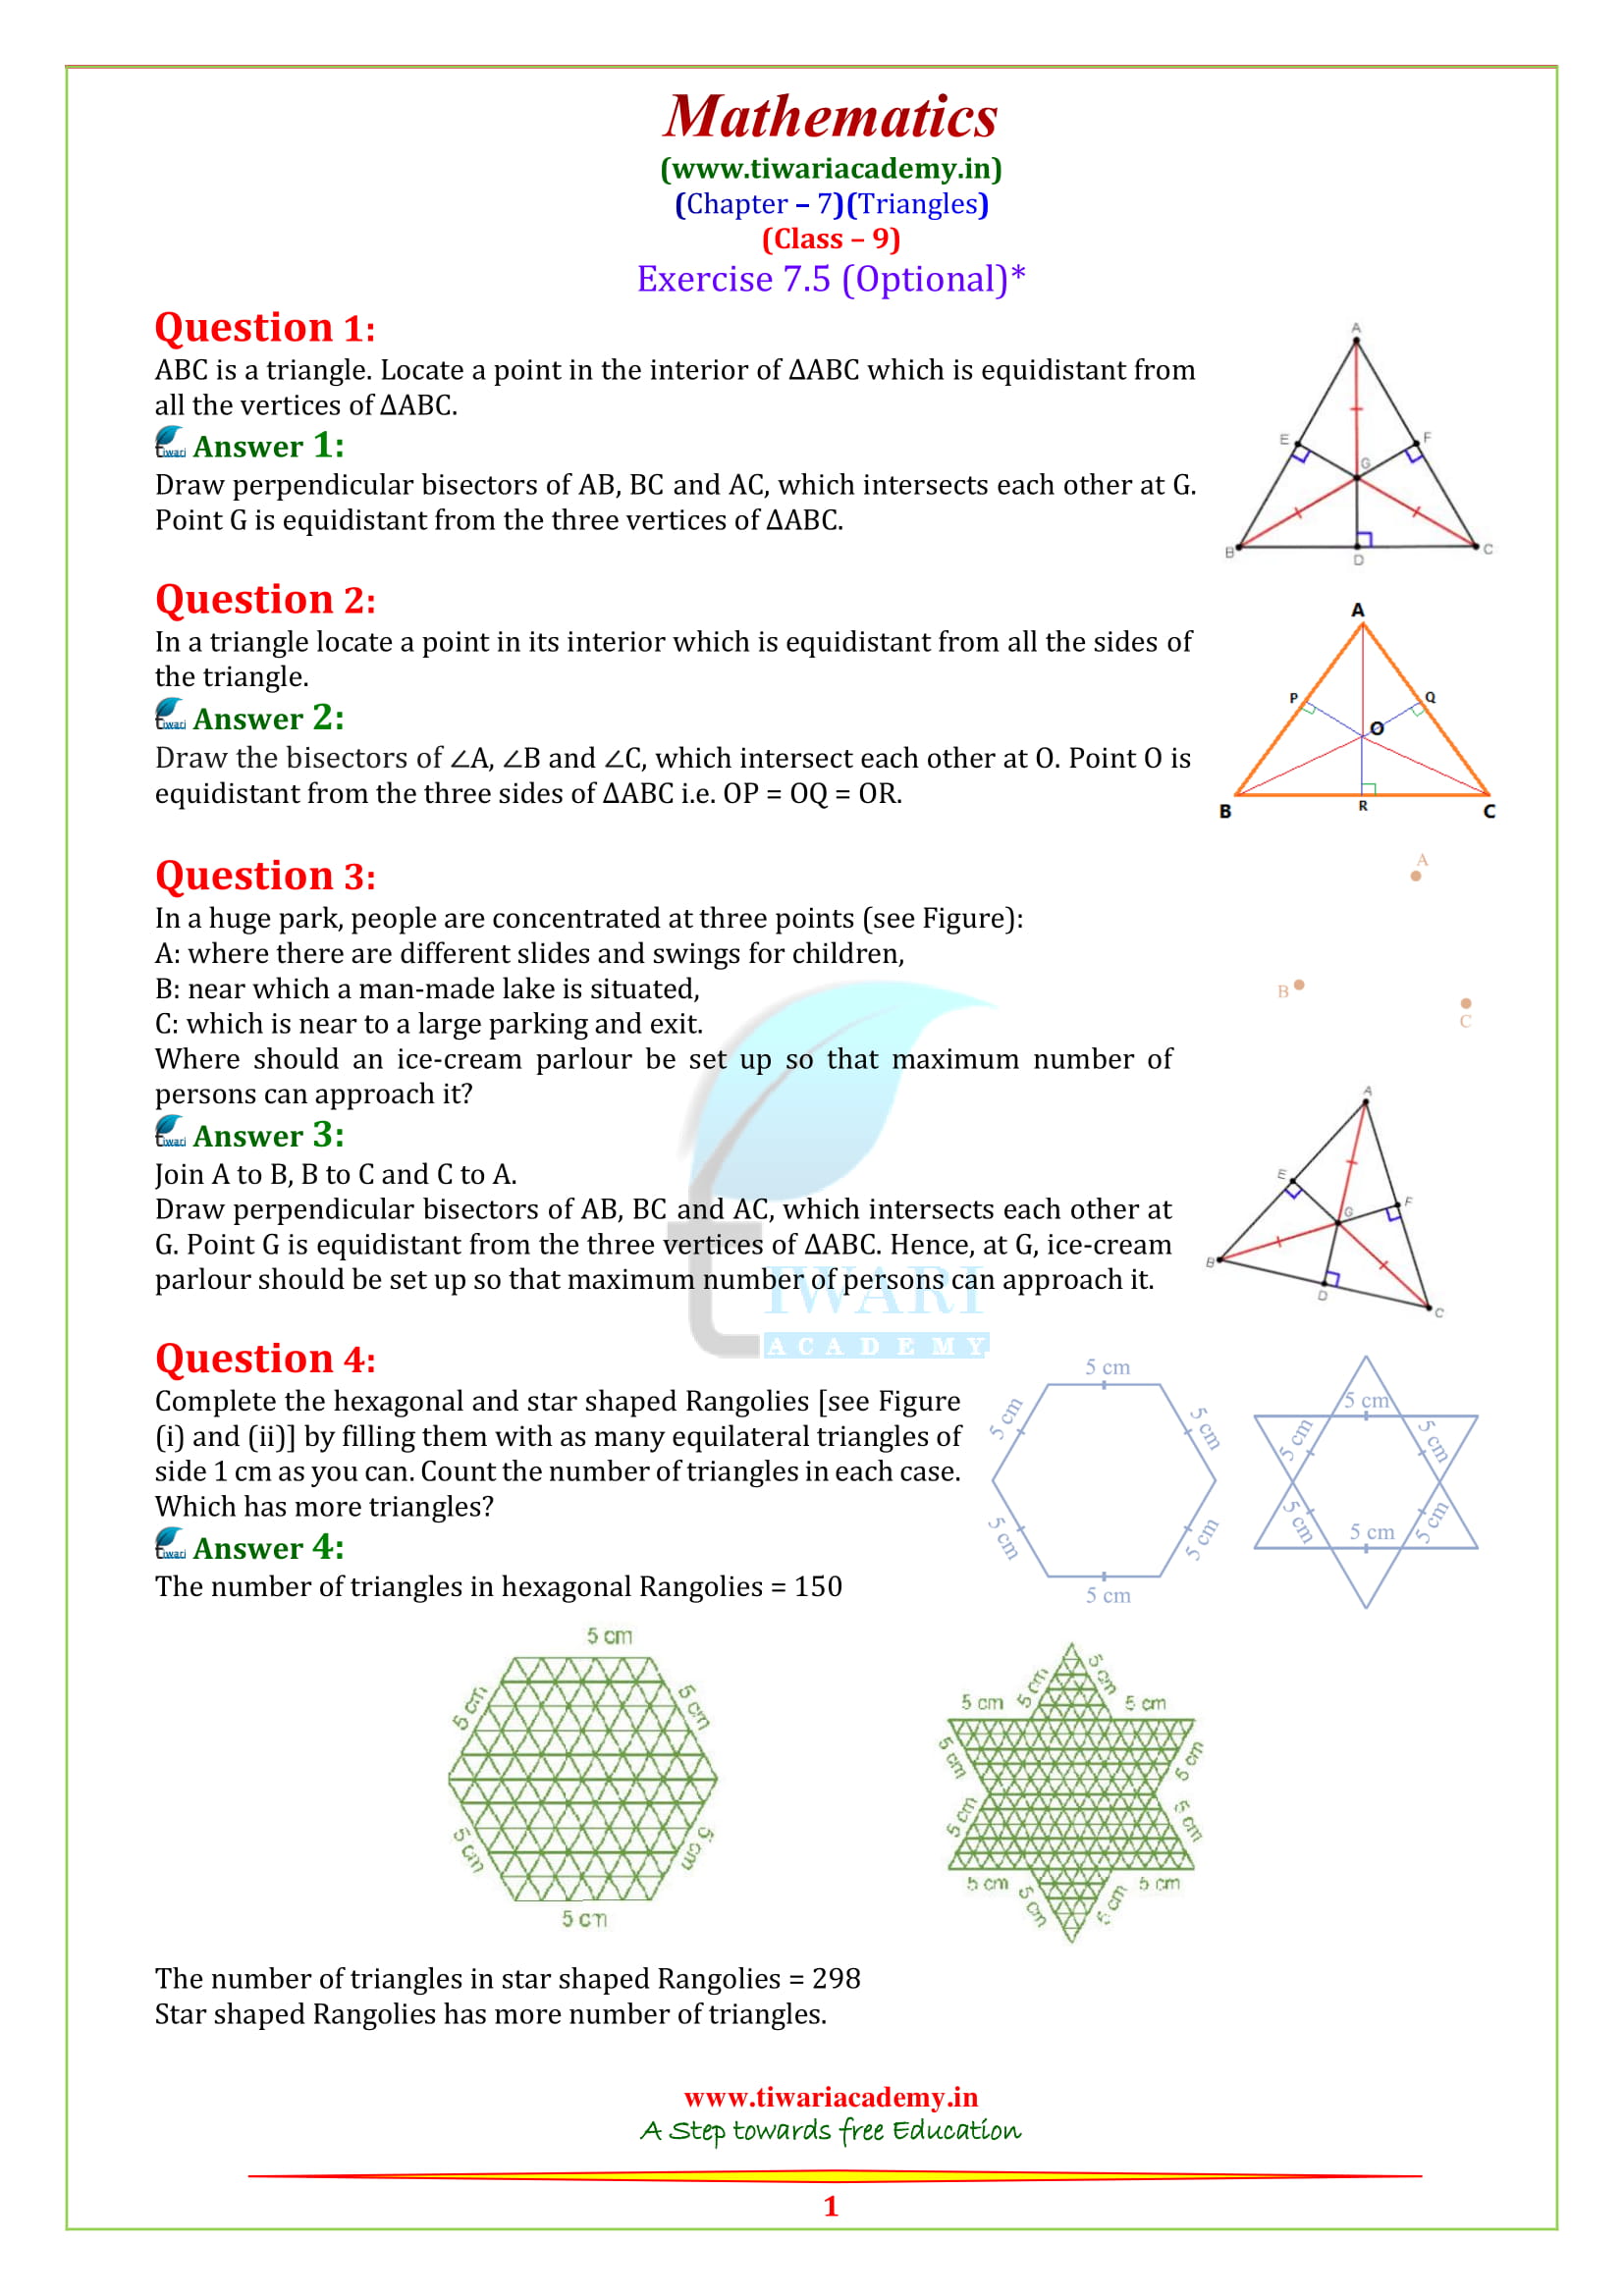 NCERT Solutions for class 9 maths chapter 7 exercise 7.5